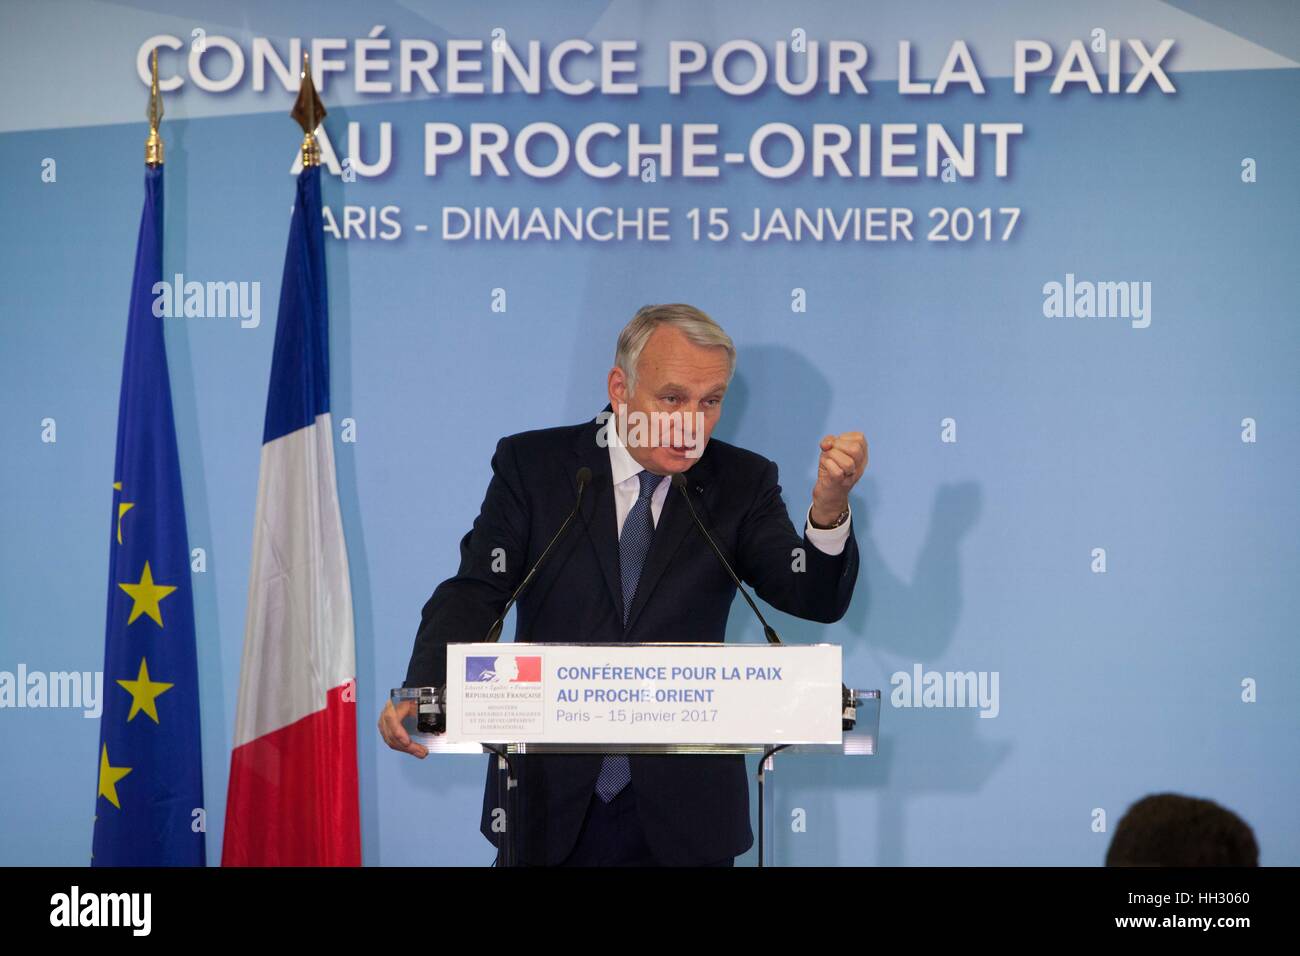 Paris, France. 15th Jan, 2017. Political figures attend the Middle East Peace Conference, Paris, France. International summit. 7O countries have participated in the summit. Jean-Marc Ayrault, French politician, Foreign Affaires Minister of France. Credit: Ania Freindorf/Alamy Live News Stock Photo